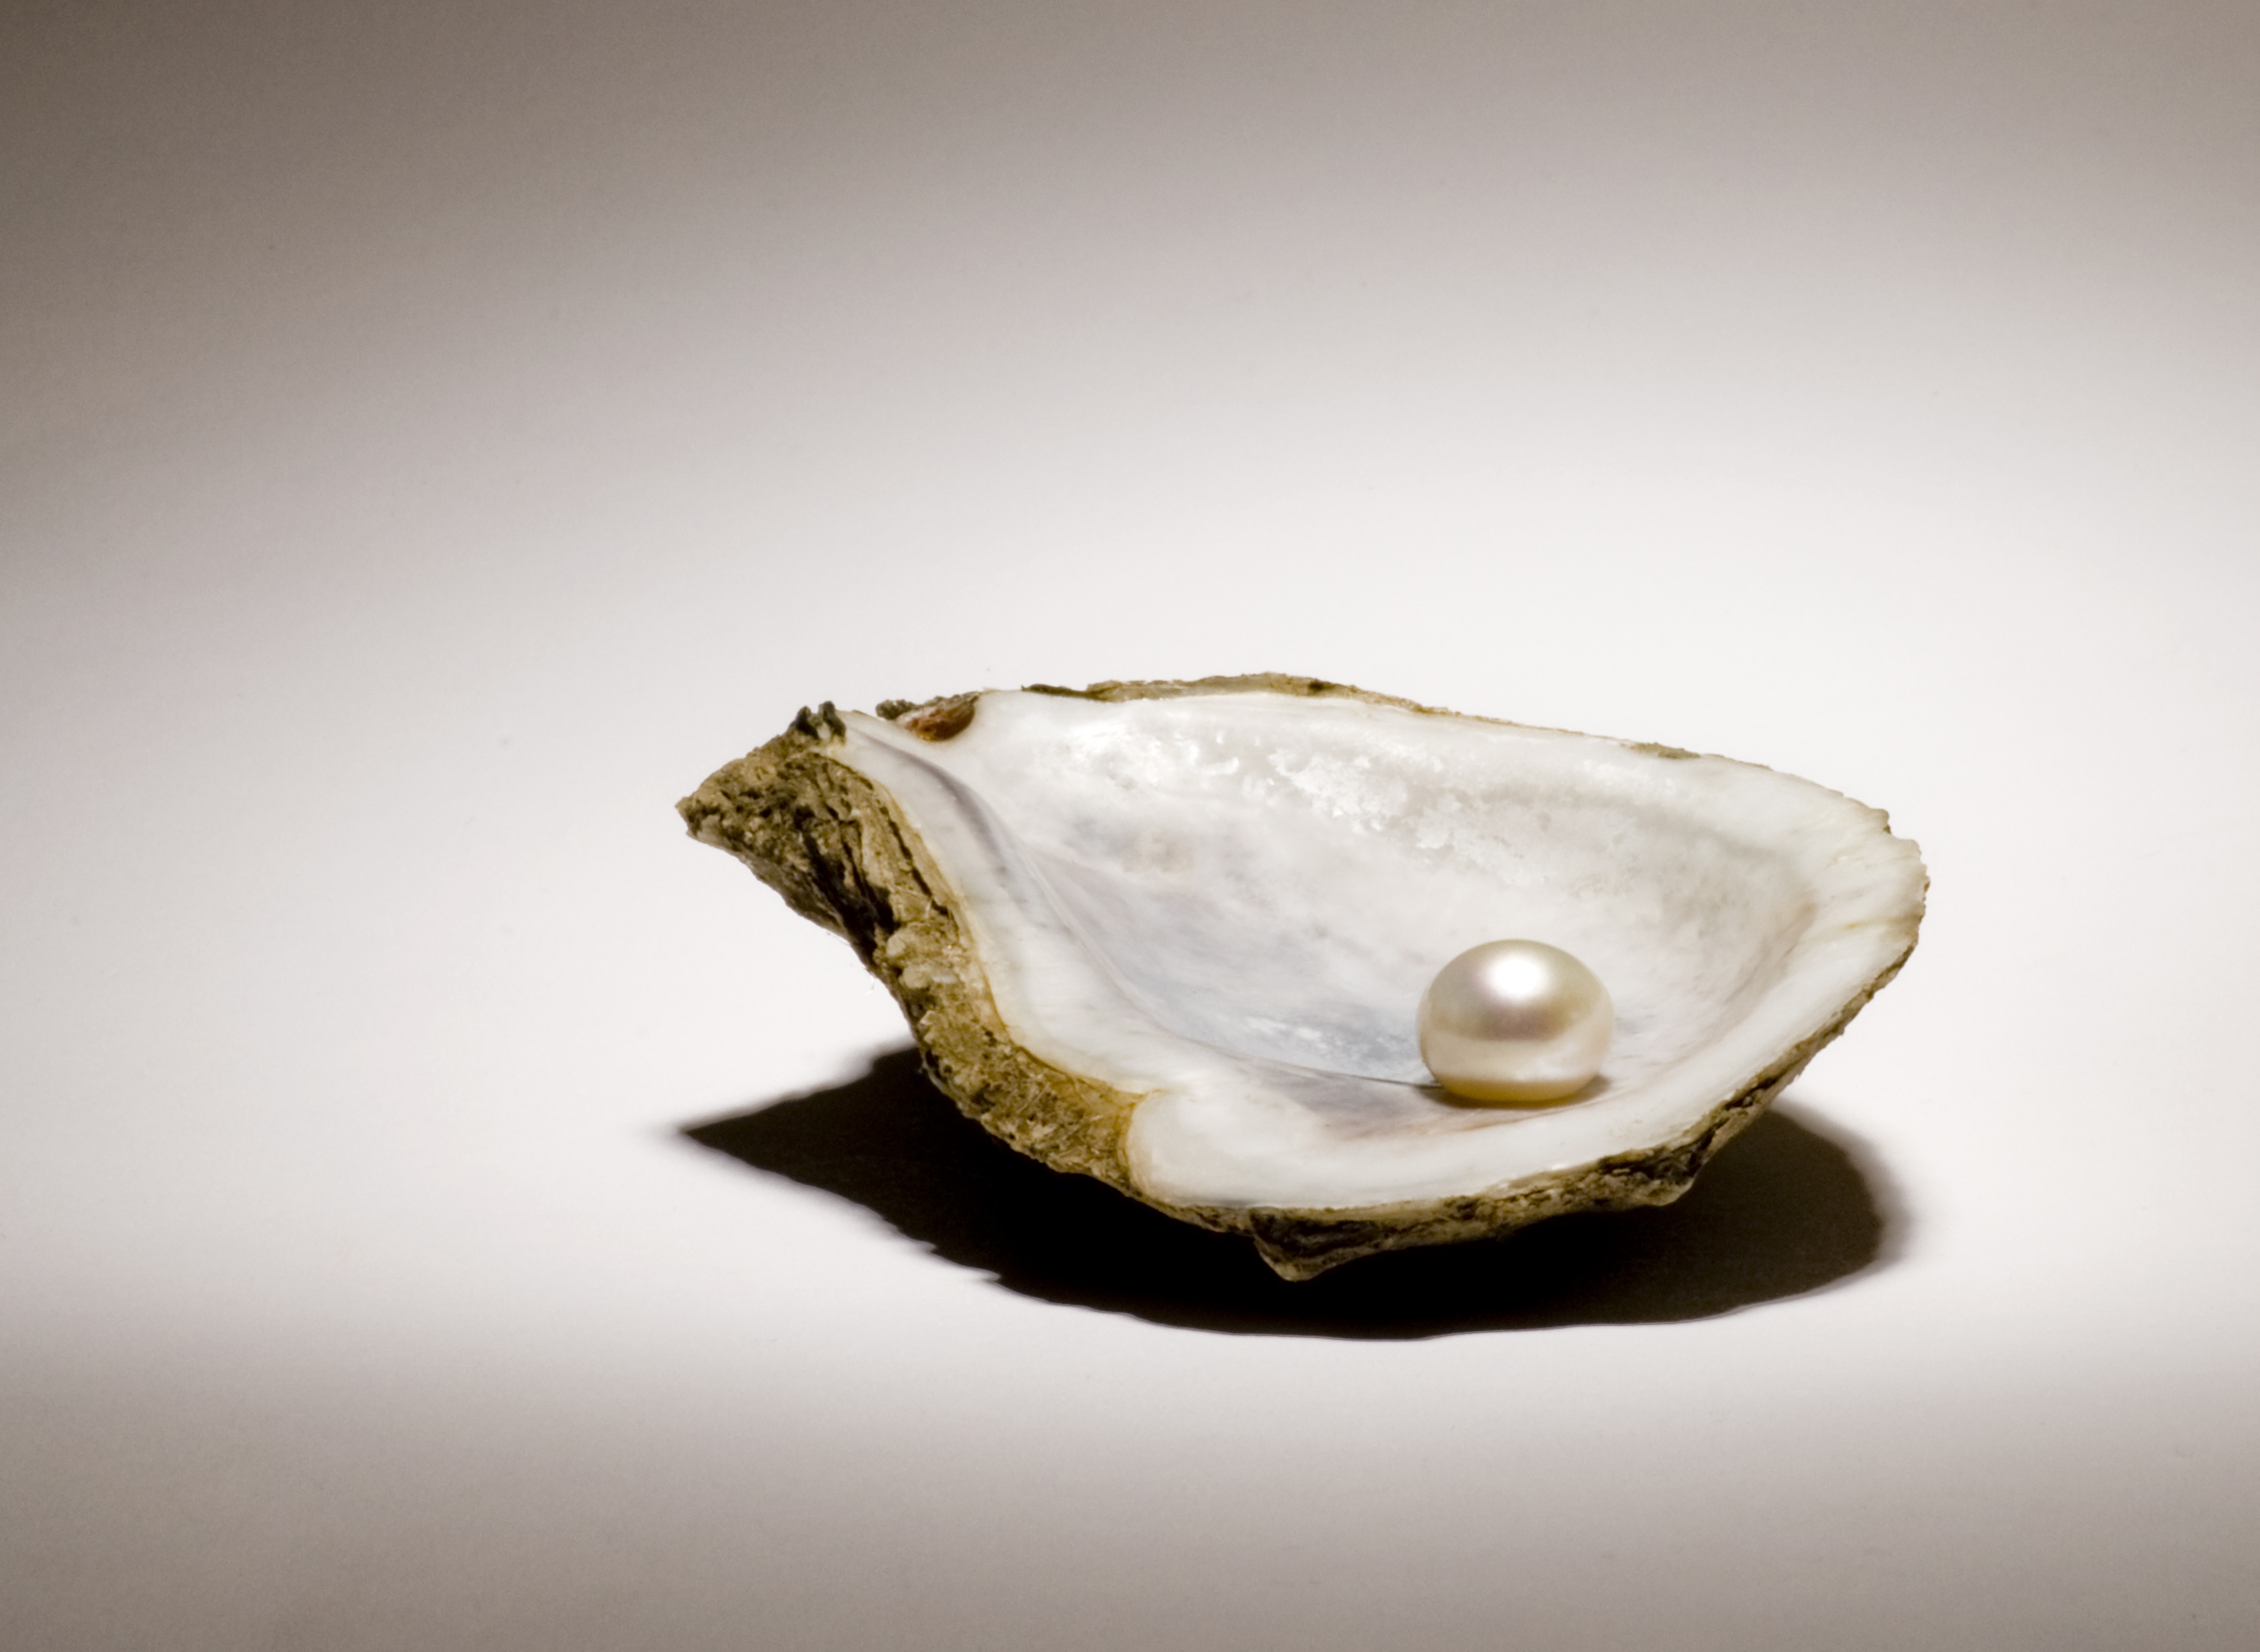 Pearl in oyster shell - demonstrating how it's a wound